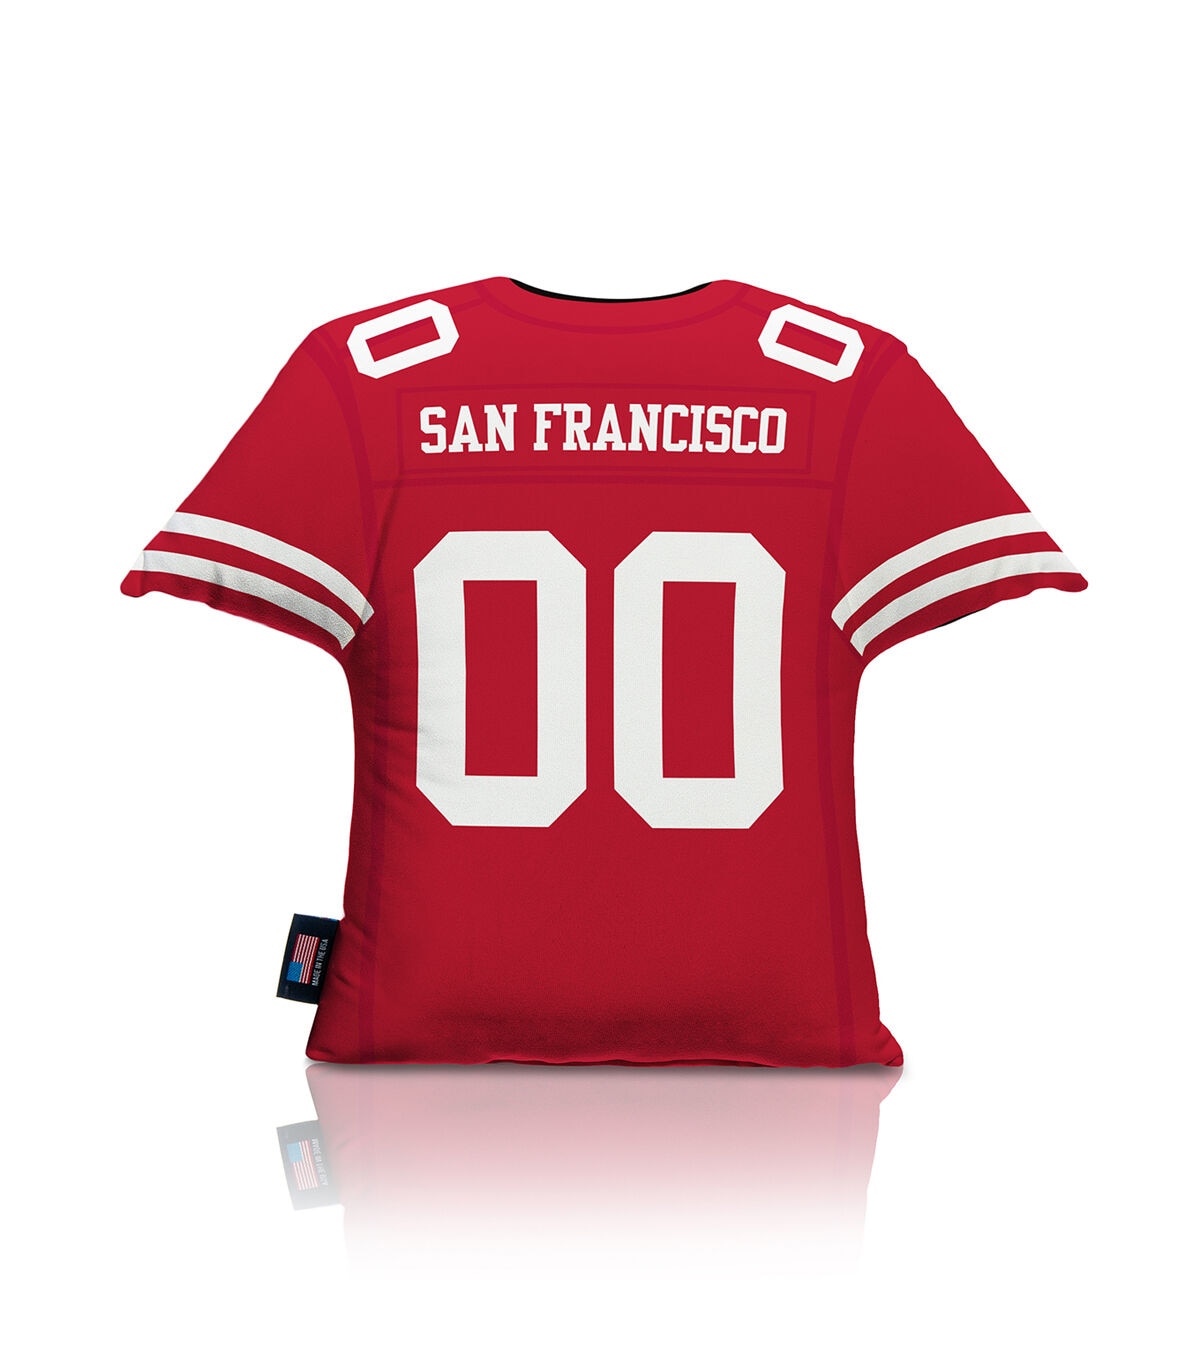 what 49ers jersey should i get